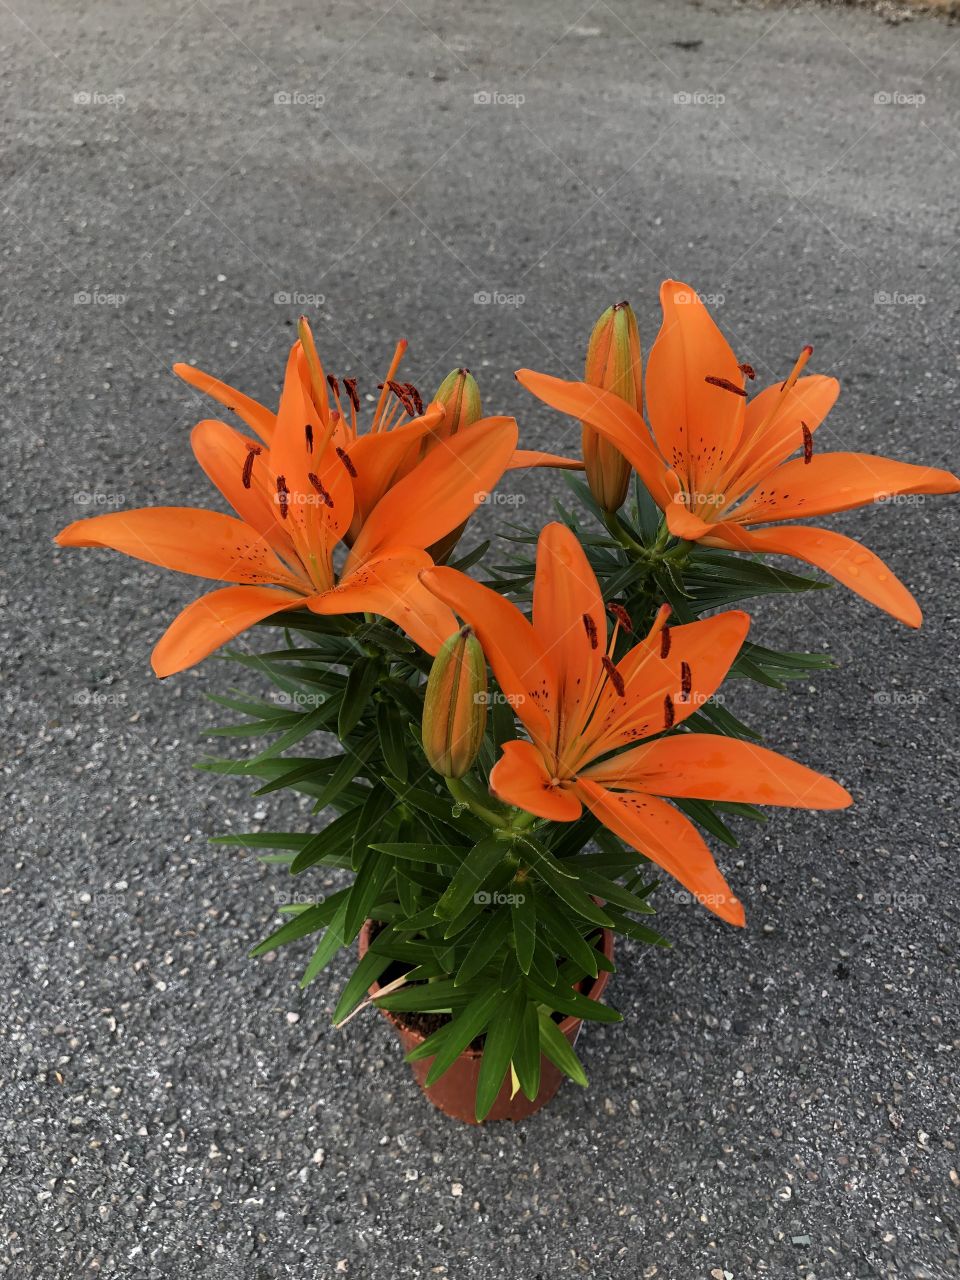 Orange colored Lillie’s in impeccable health. Photo taken from directly above the Lillie’s.